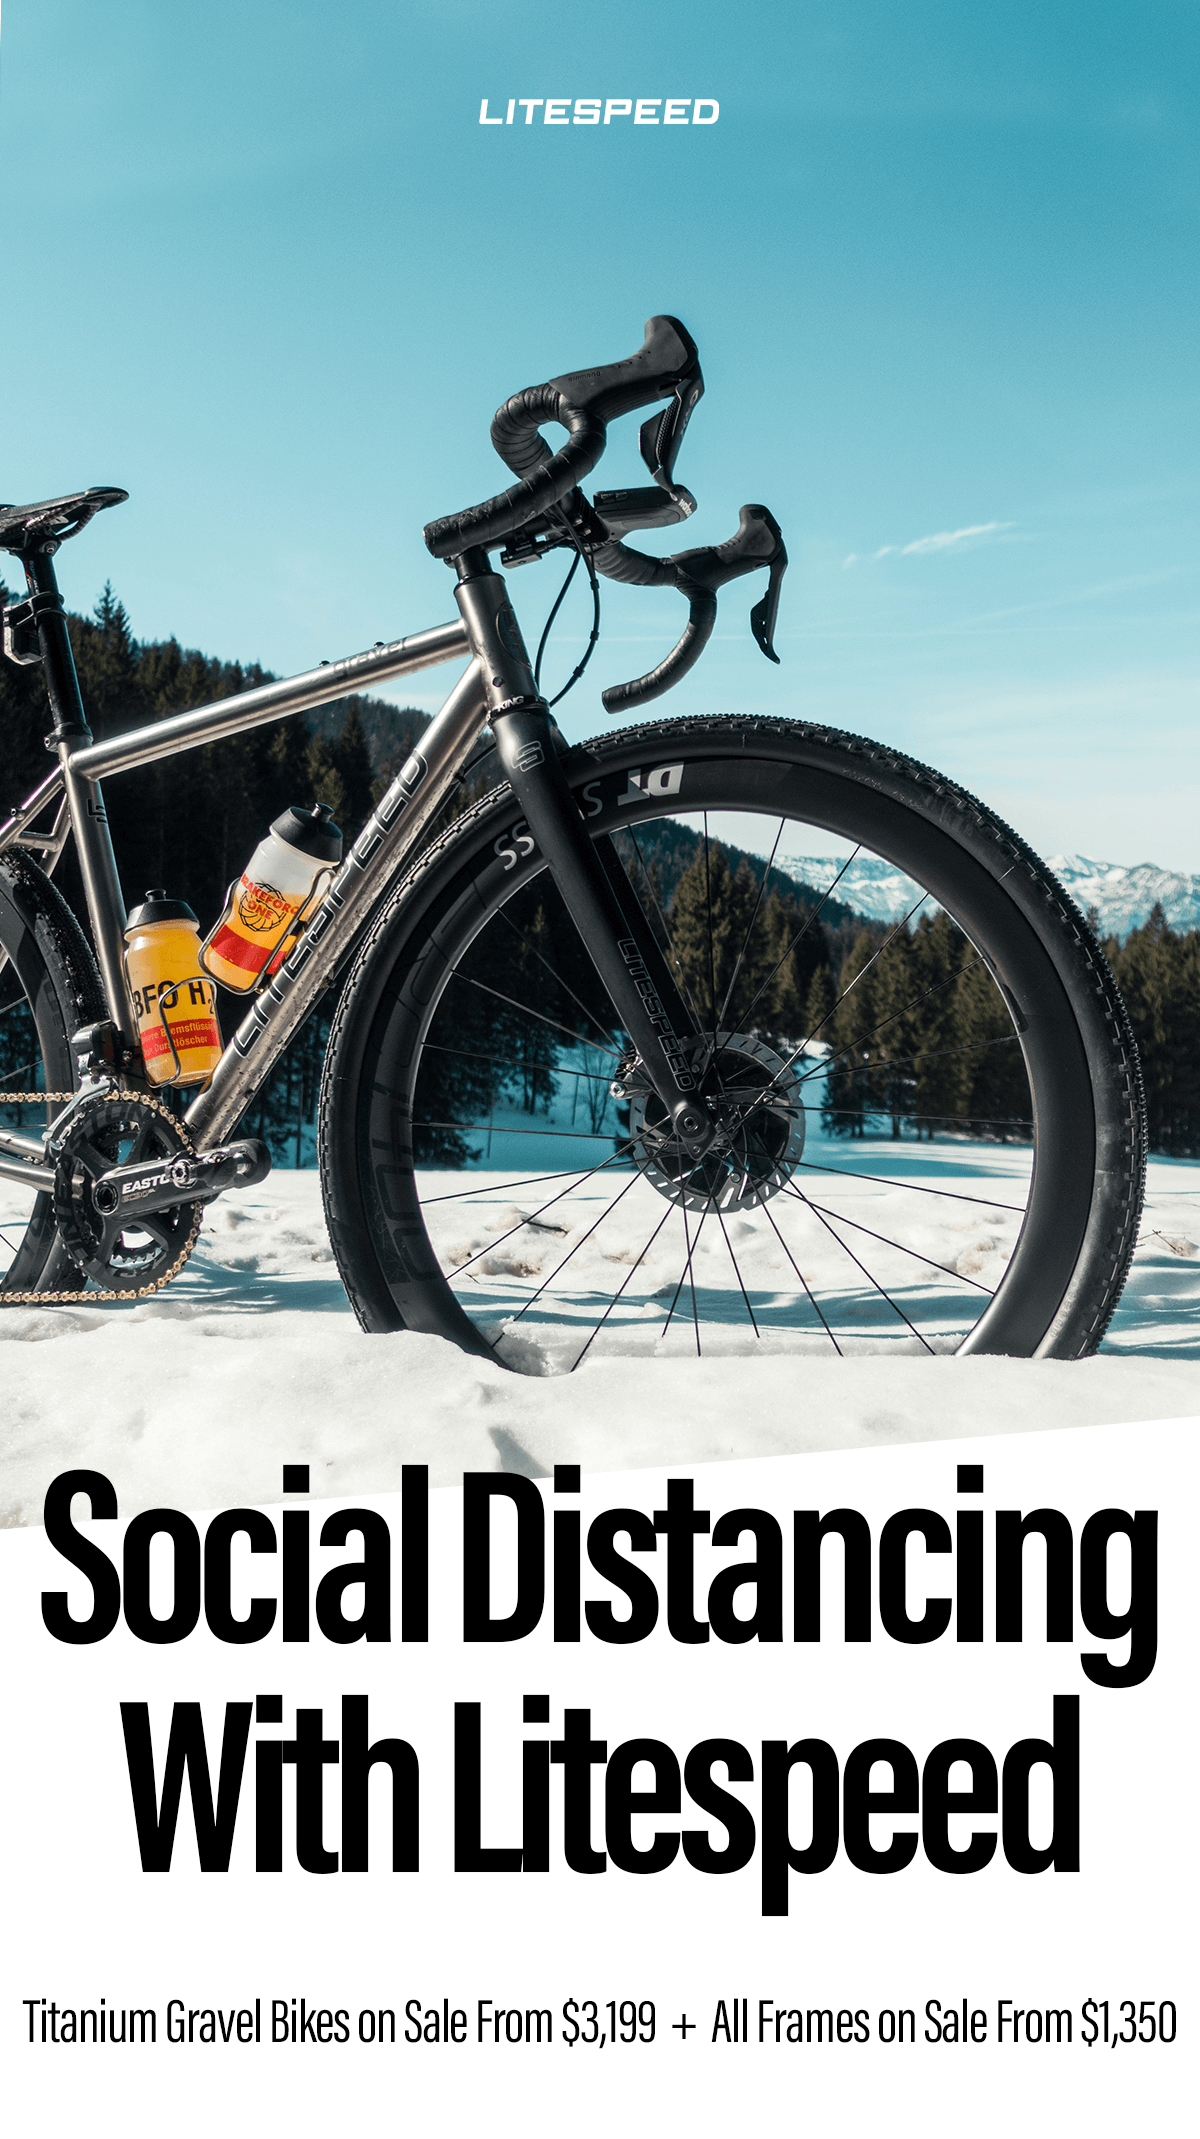 Social Distancing with Litespeed. The Spring Sale starts now, with gravel bikes from $3,199 and all frames from $1,350.